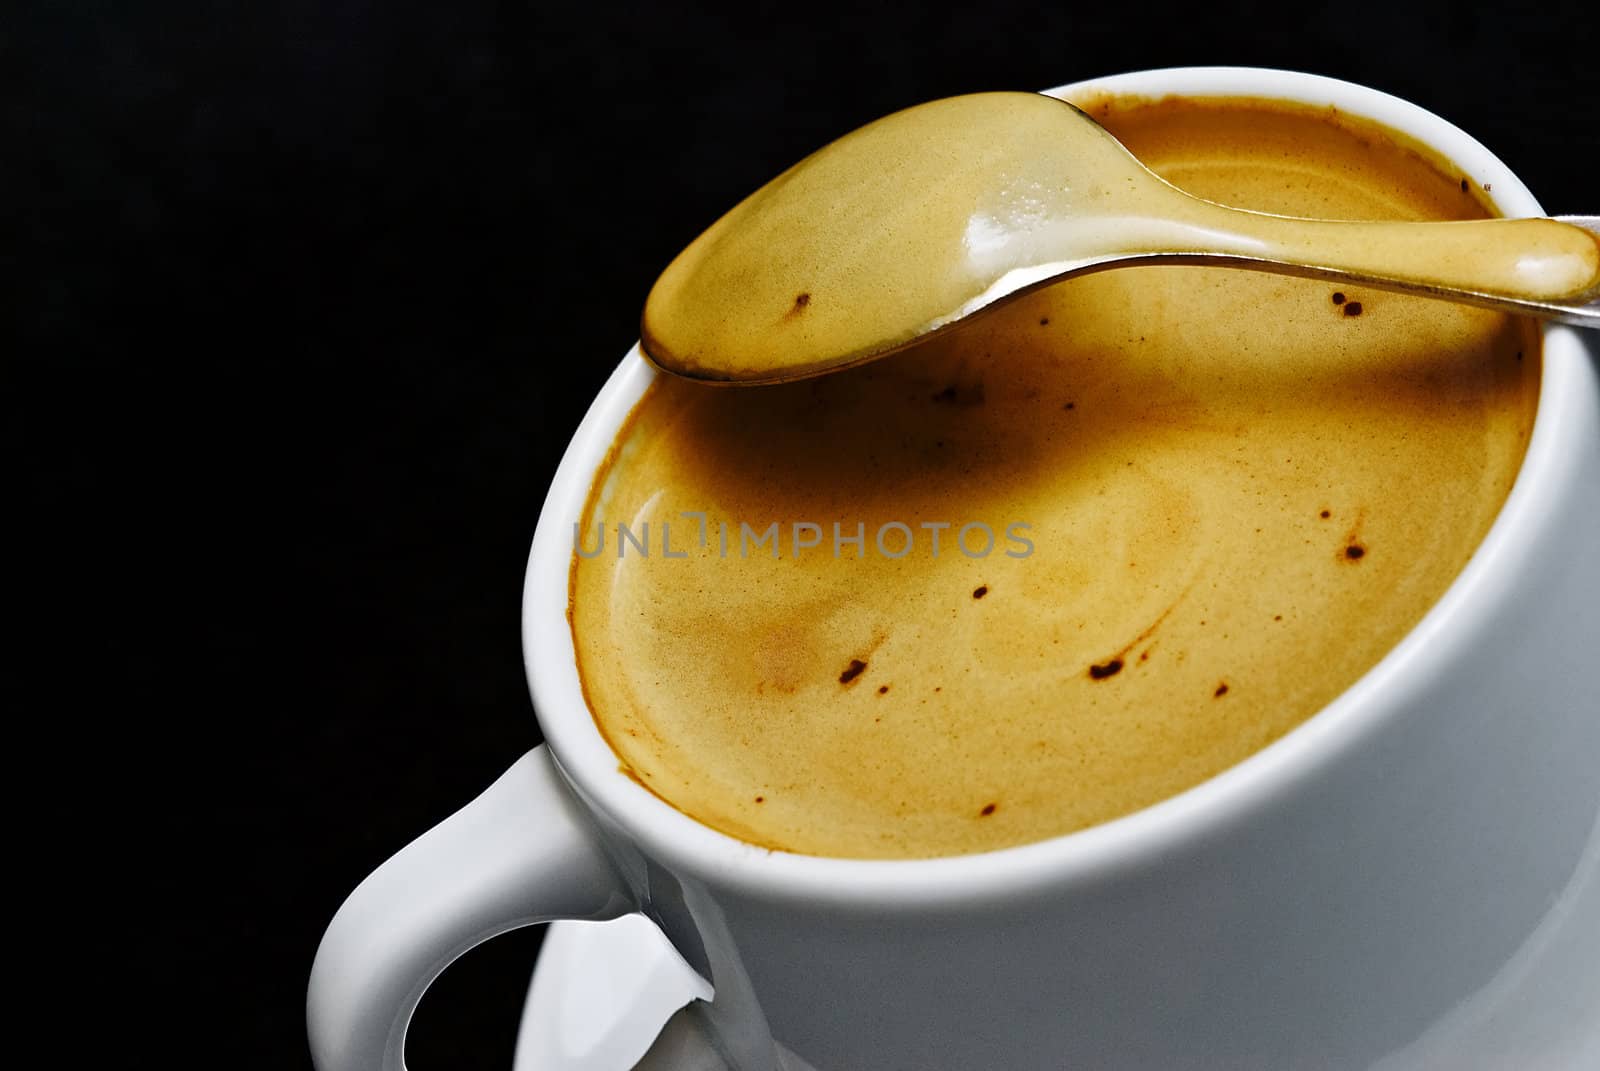 A cup of coffee on a black background.